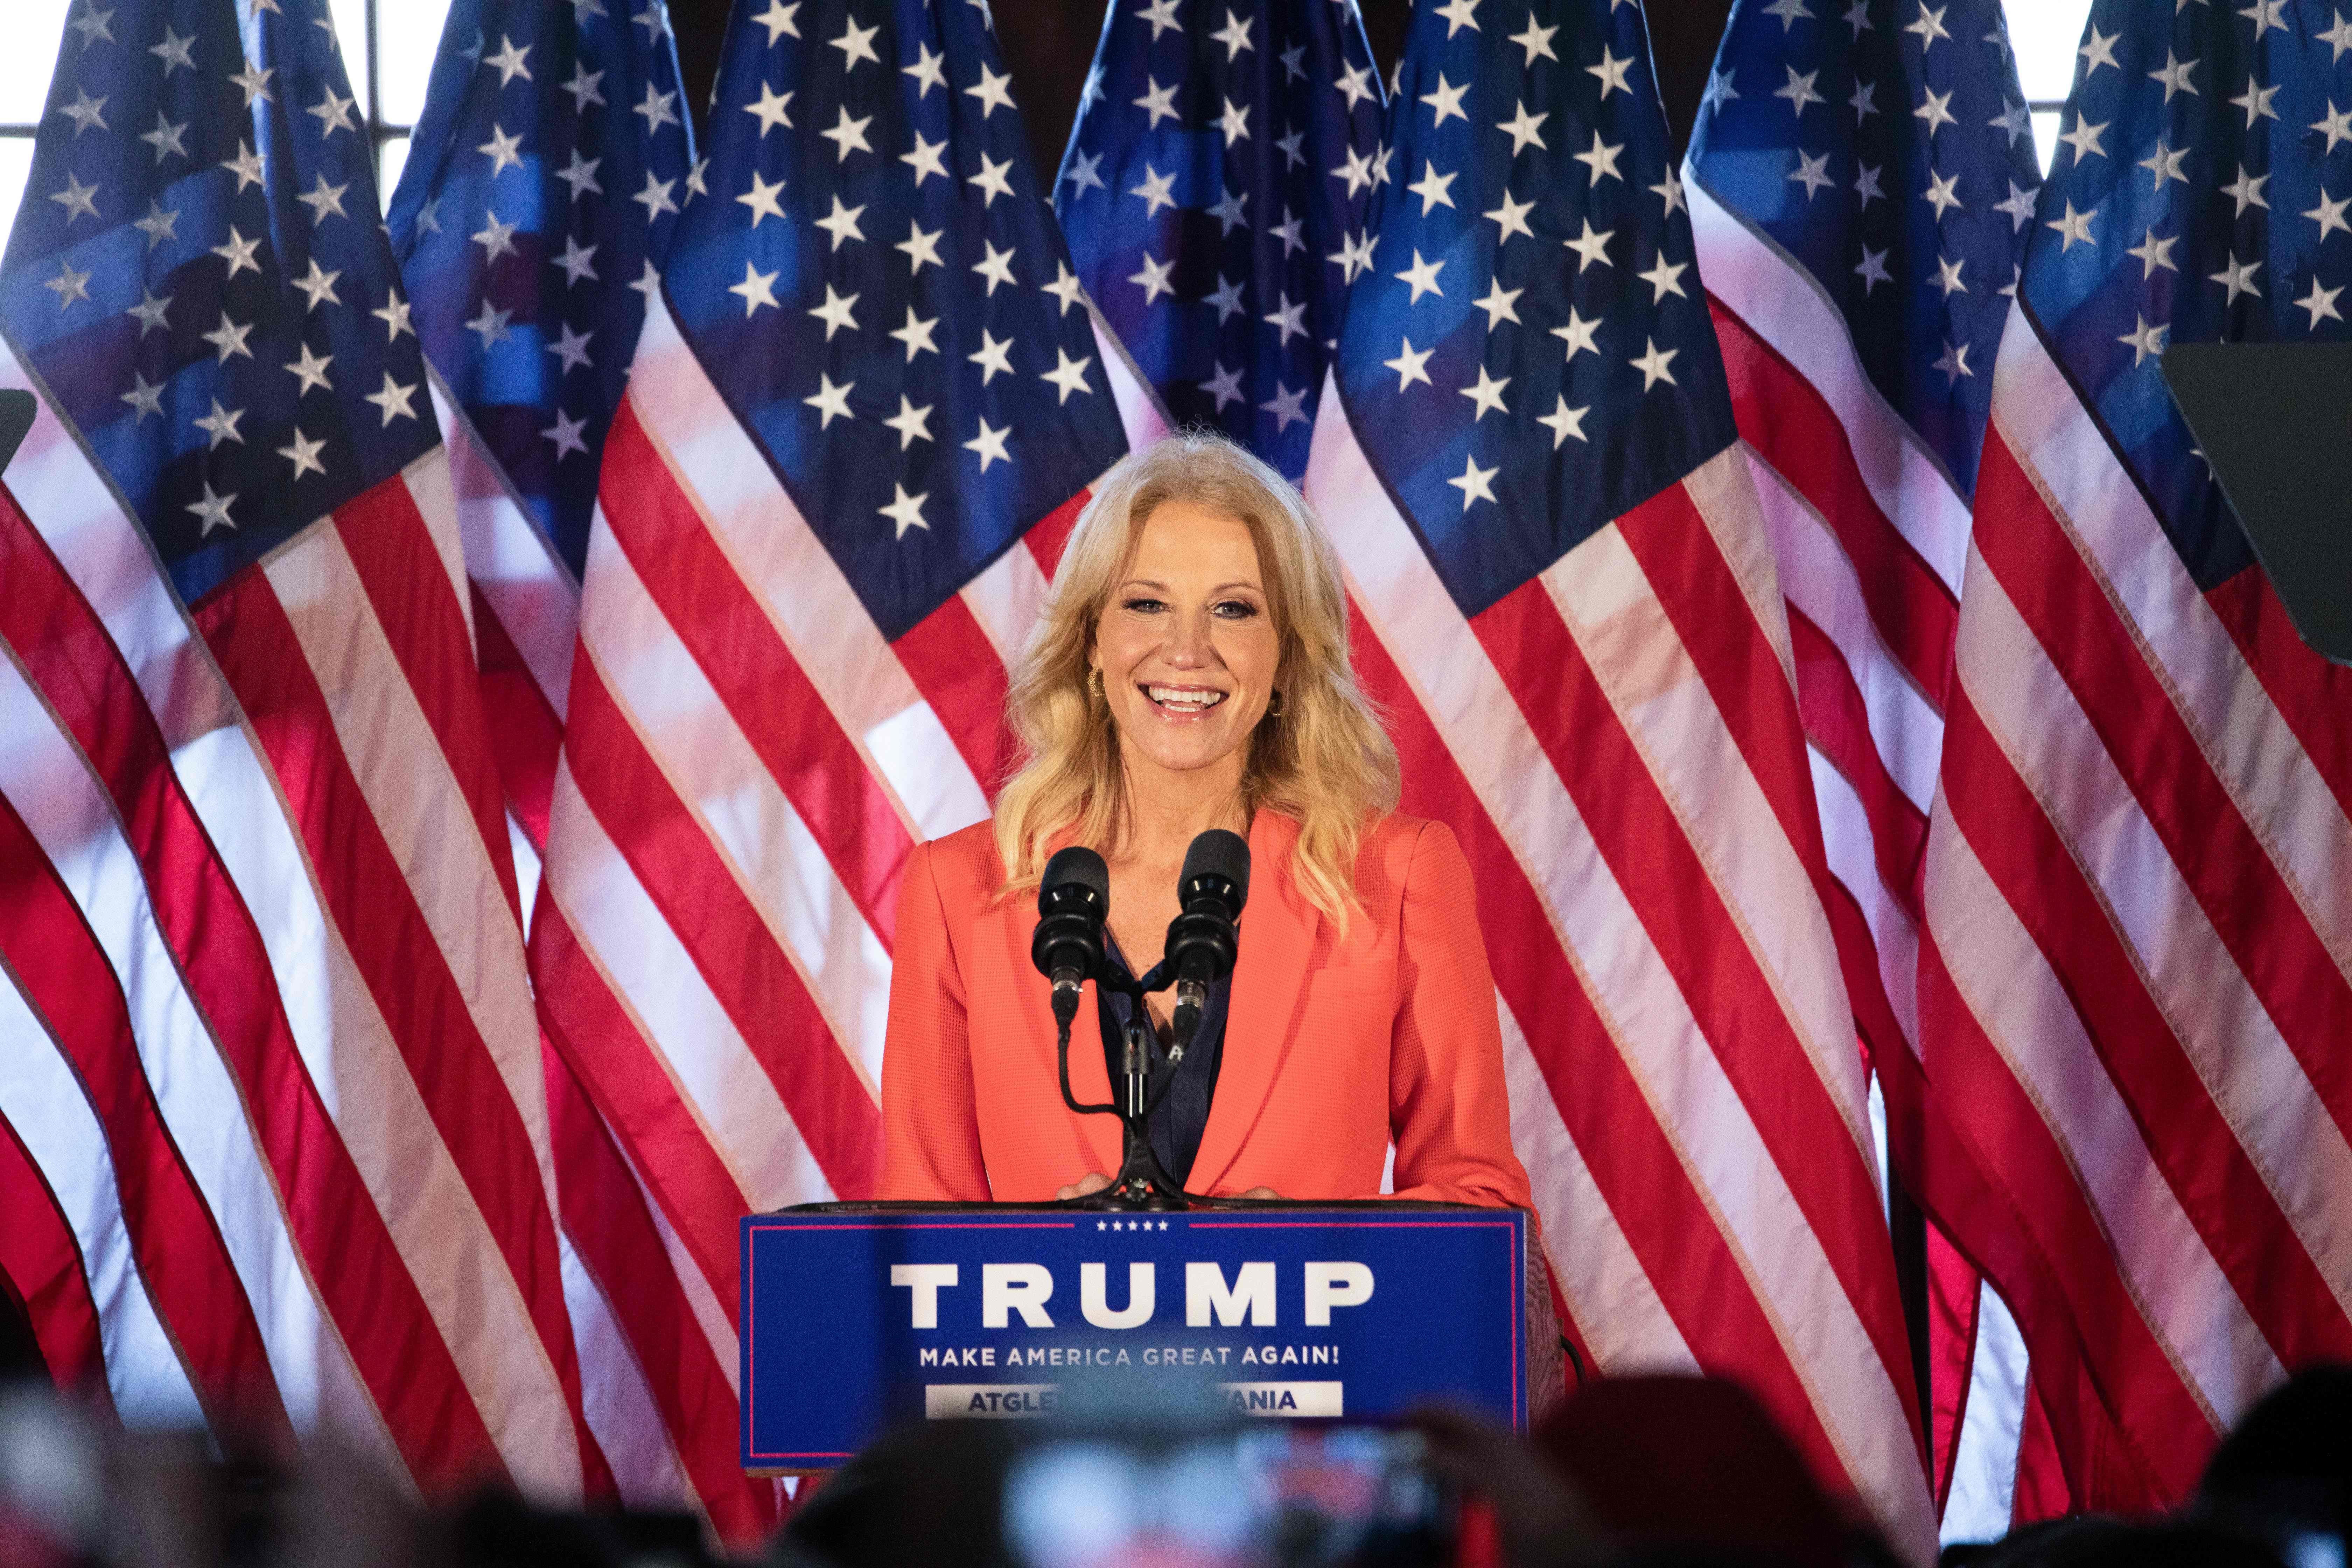 Former Counselor to the President of the United States Kellyanne Conway speaks to Trump supporters at a Make America Great Again event with First Lady Melania Trump in Atglen, Pennsylvania, on Oct. 27, 2020.